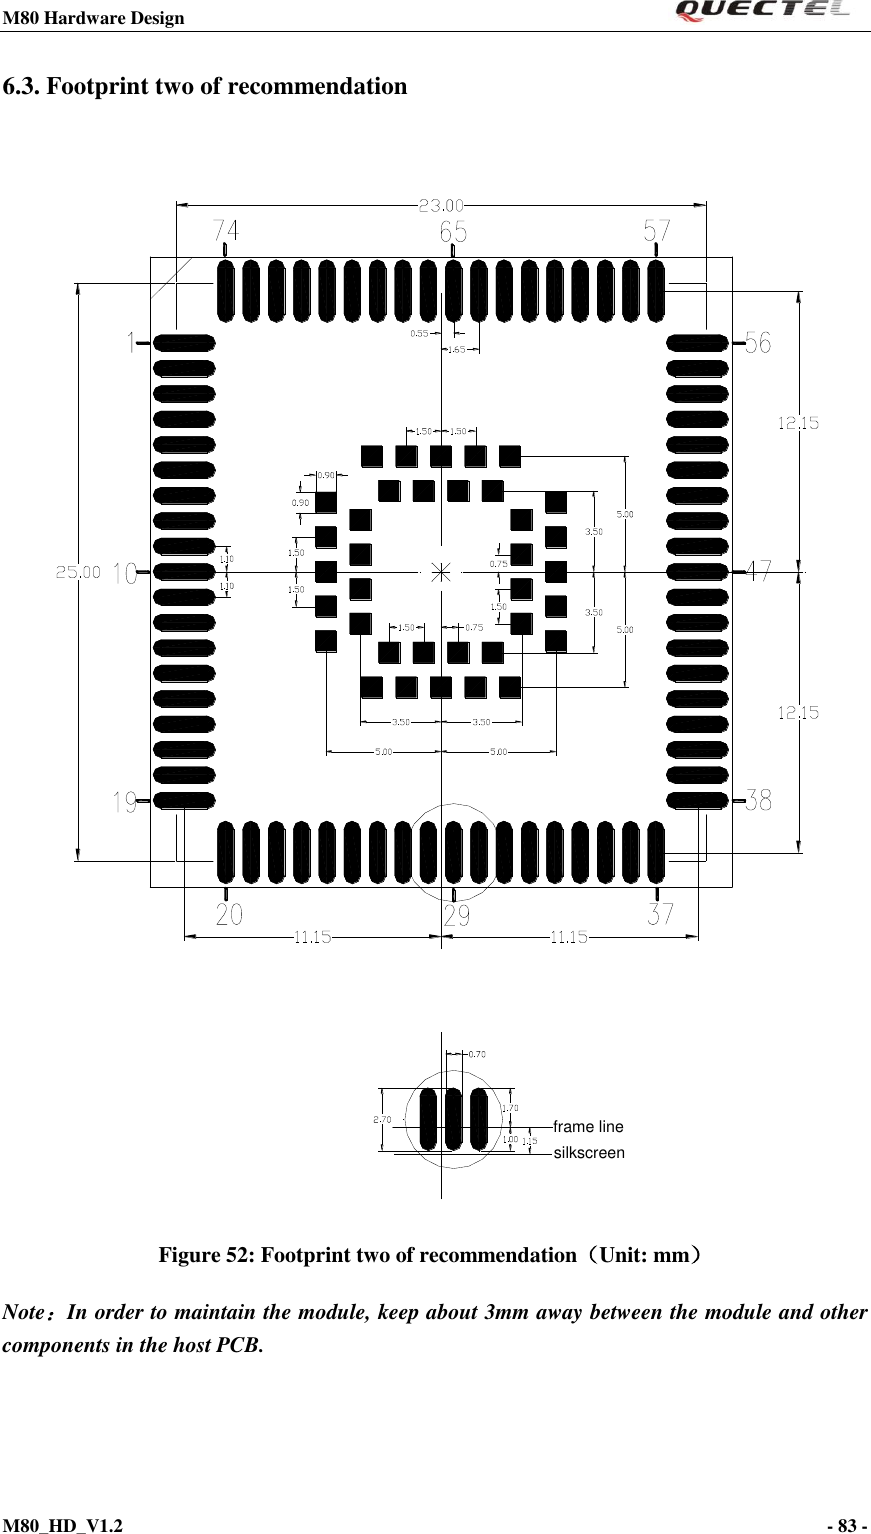 M80 Hardware Design                                                                M80_HD_V1.2                                                                                                                                        - 83 -    6.3. Footprint two of recommendation  silkscreenframe line Figure 52: Footprint two of recommendation（Unit: mm） Note：In order to maintain the module, keep about 3mm away between the module and other components in the host PCB. 